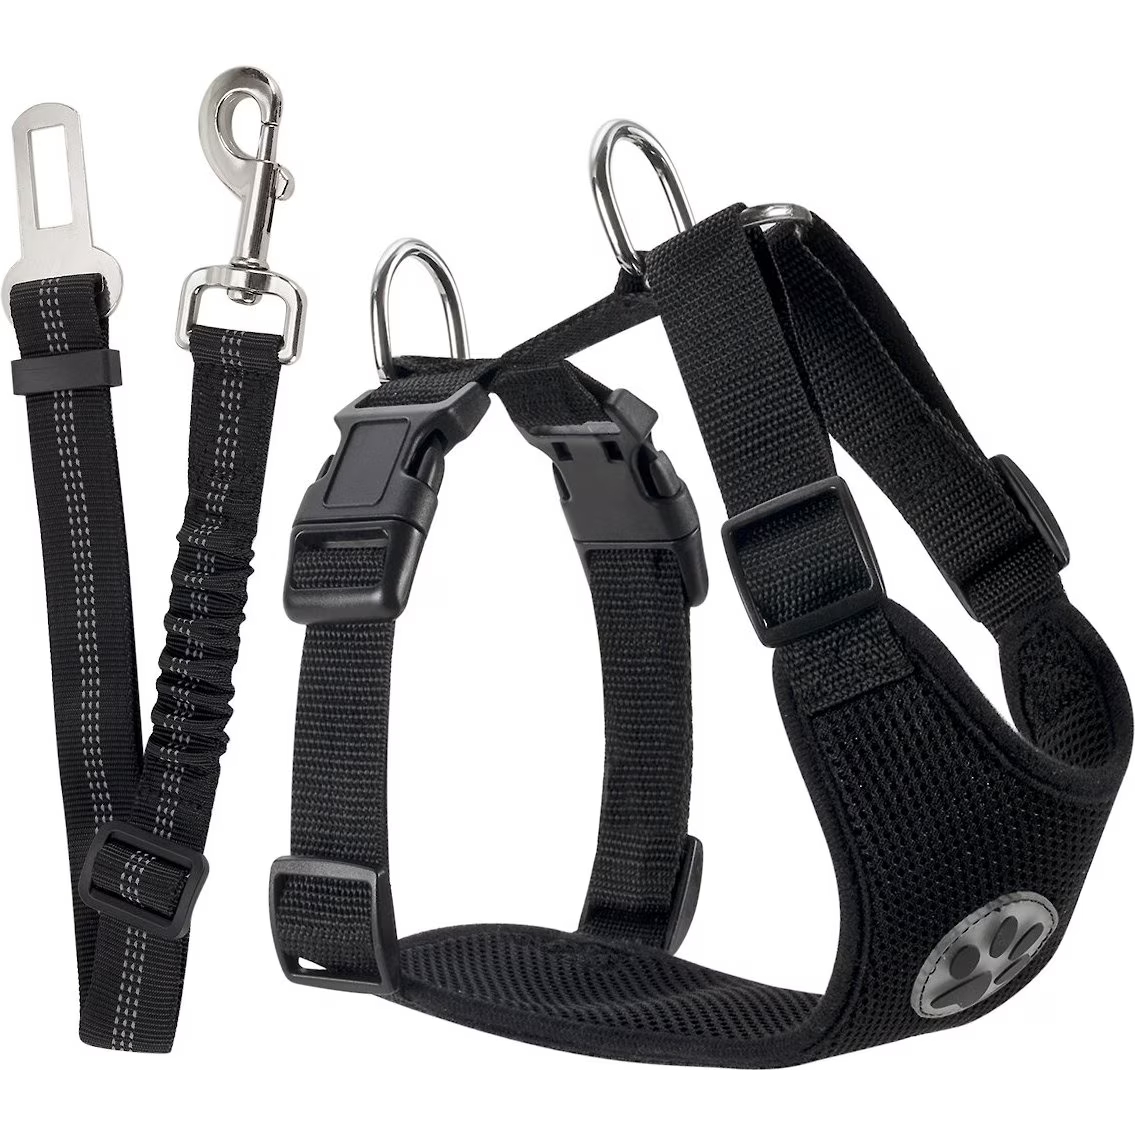 SlowTon Car Safety Harness with Seat Belt